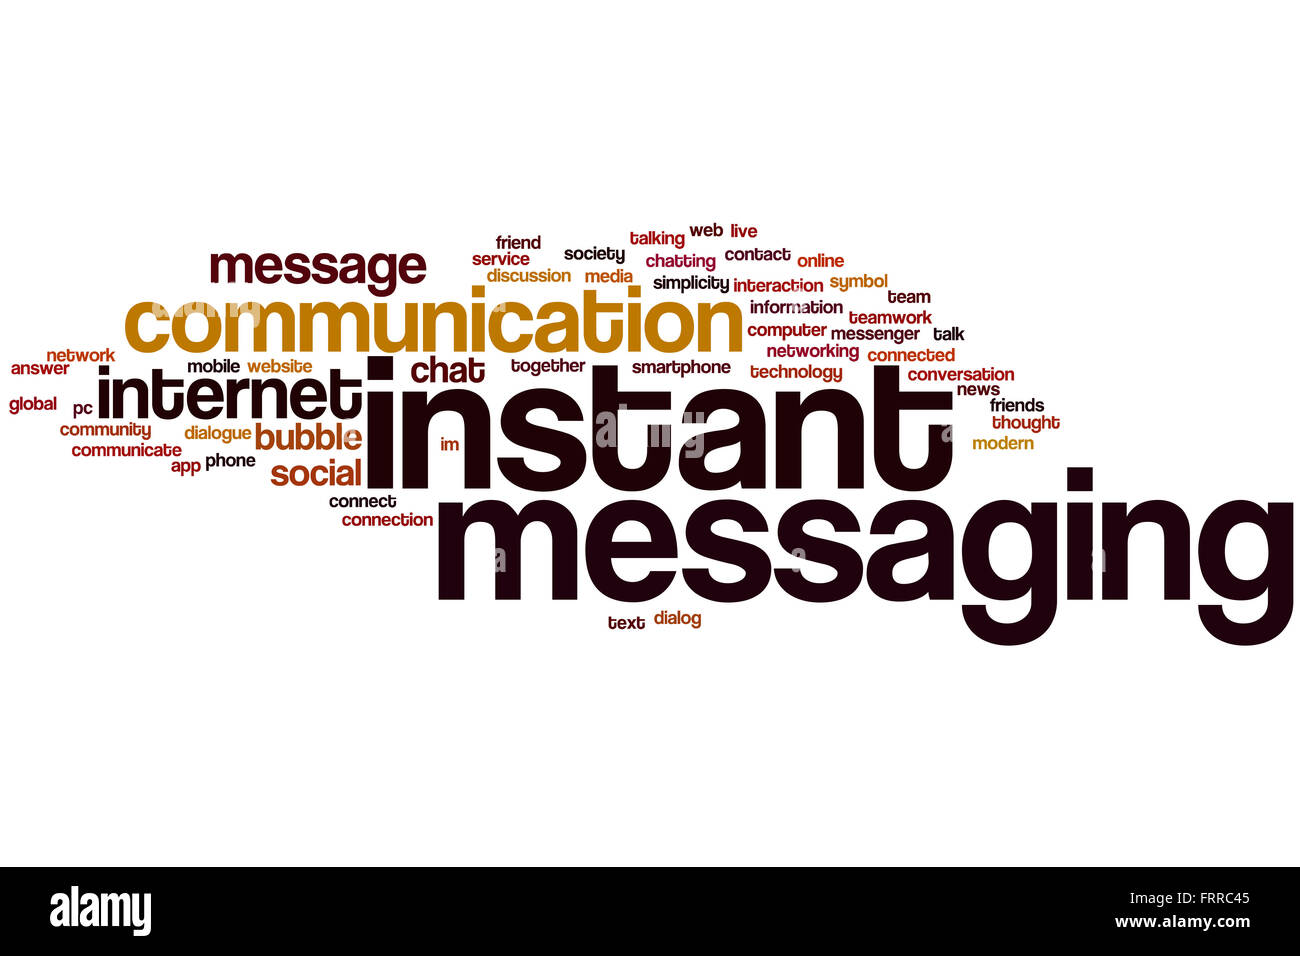 Instant messaging concept word cloud background Stock Photo